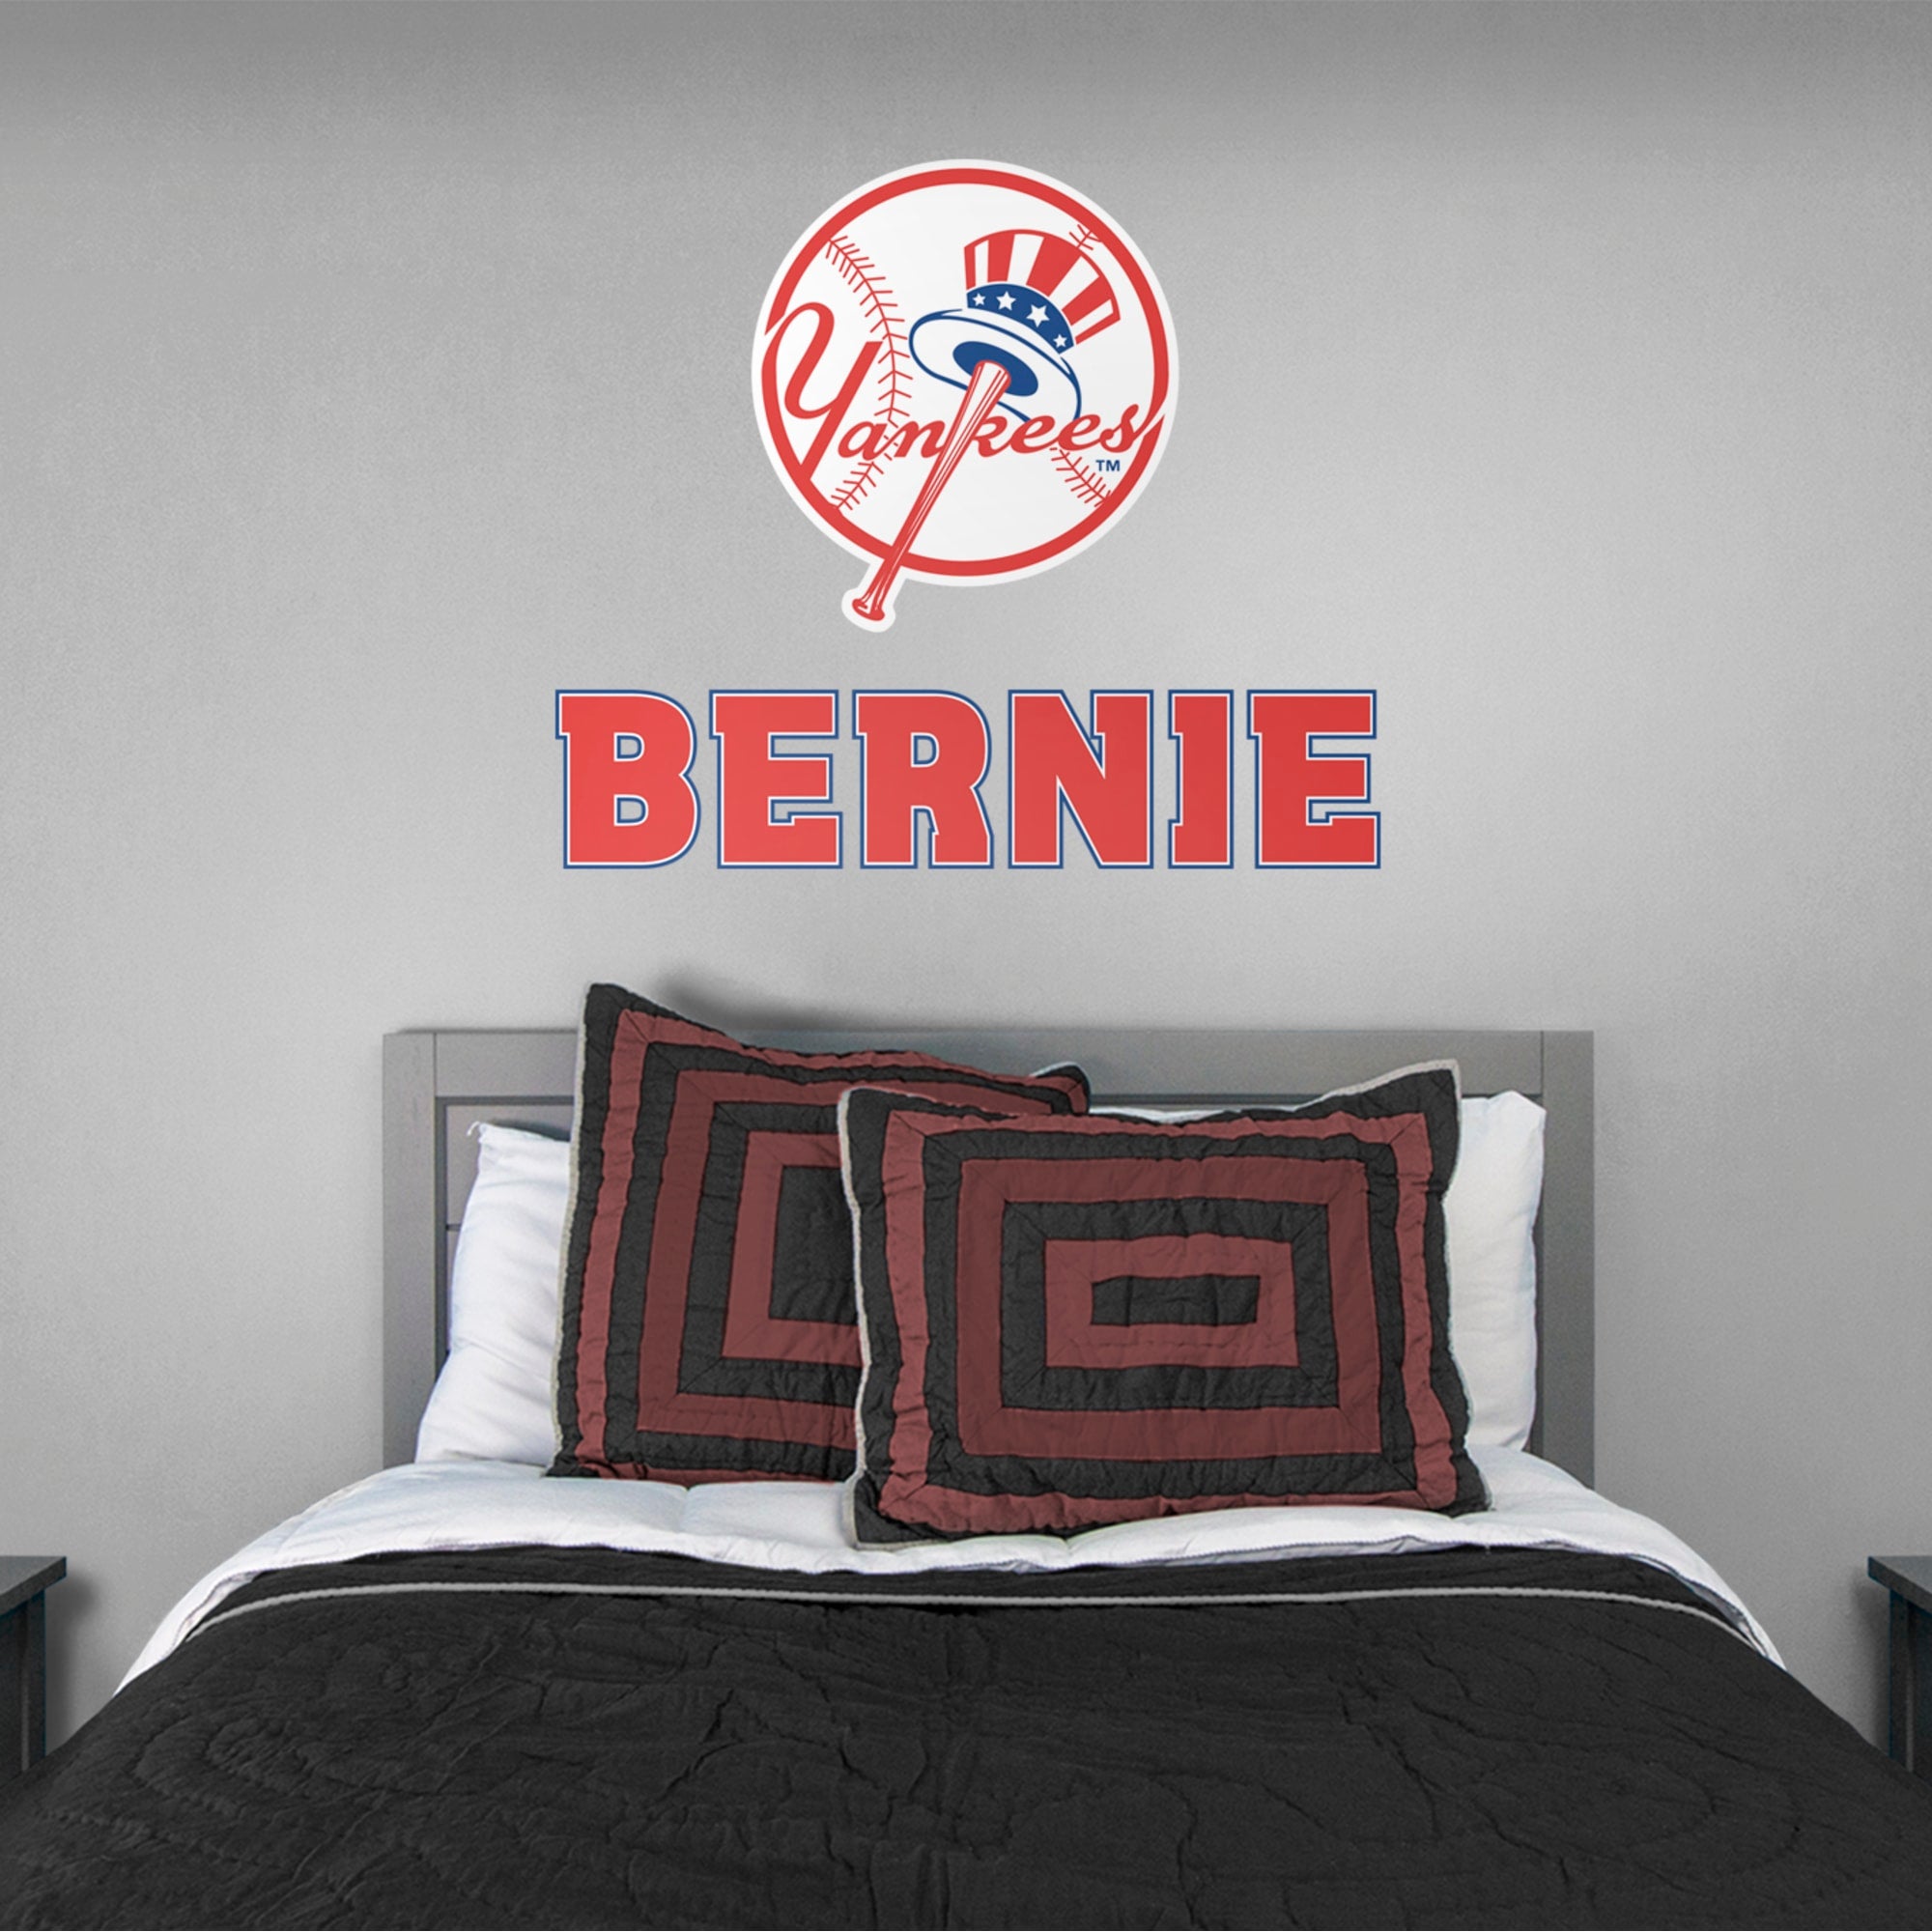 New York Yankees: Stacked Personalized Name - Officially Licensed MLB Transfer Decal in Red (52"W x 39.5"H) by Fathead | Vinyl